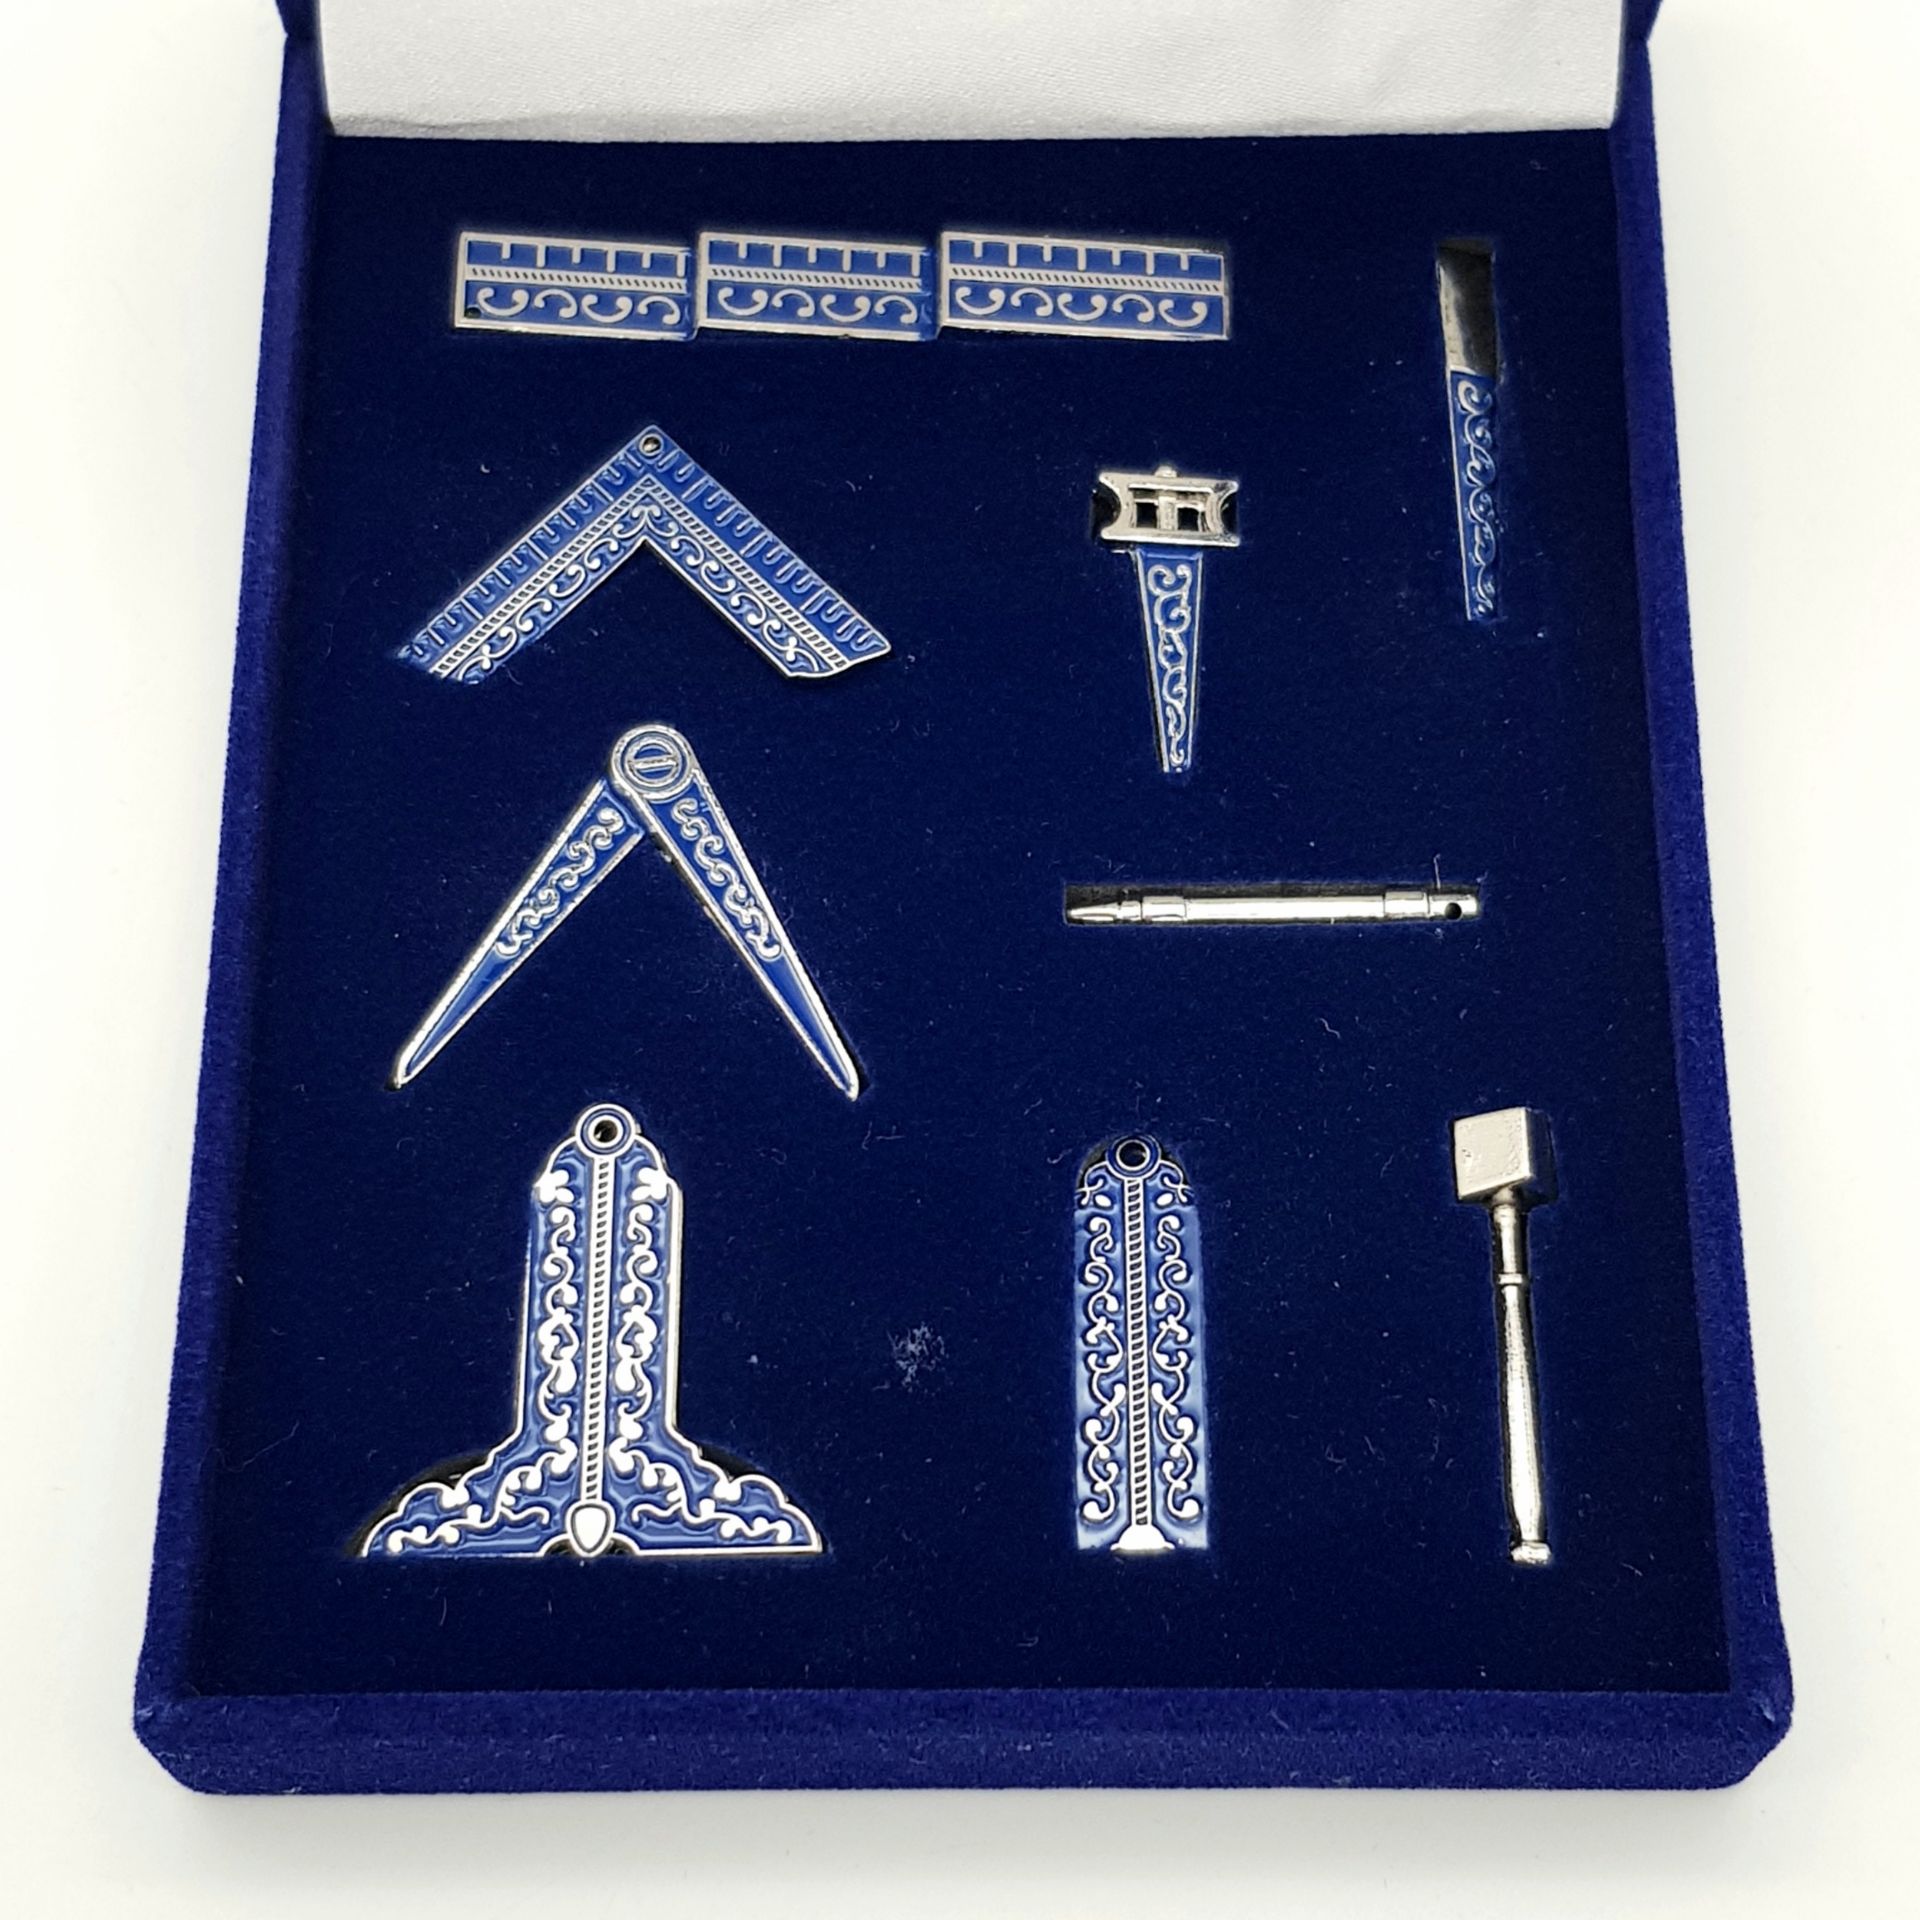 A miniature set of Masonic Working Tools for all Three Degrees. Perfect for training and rehearsals, - Image 5 of 6